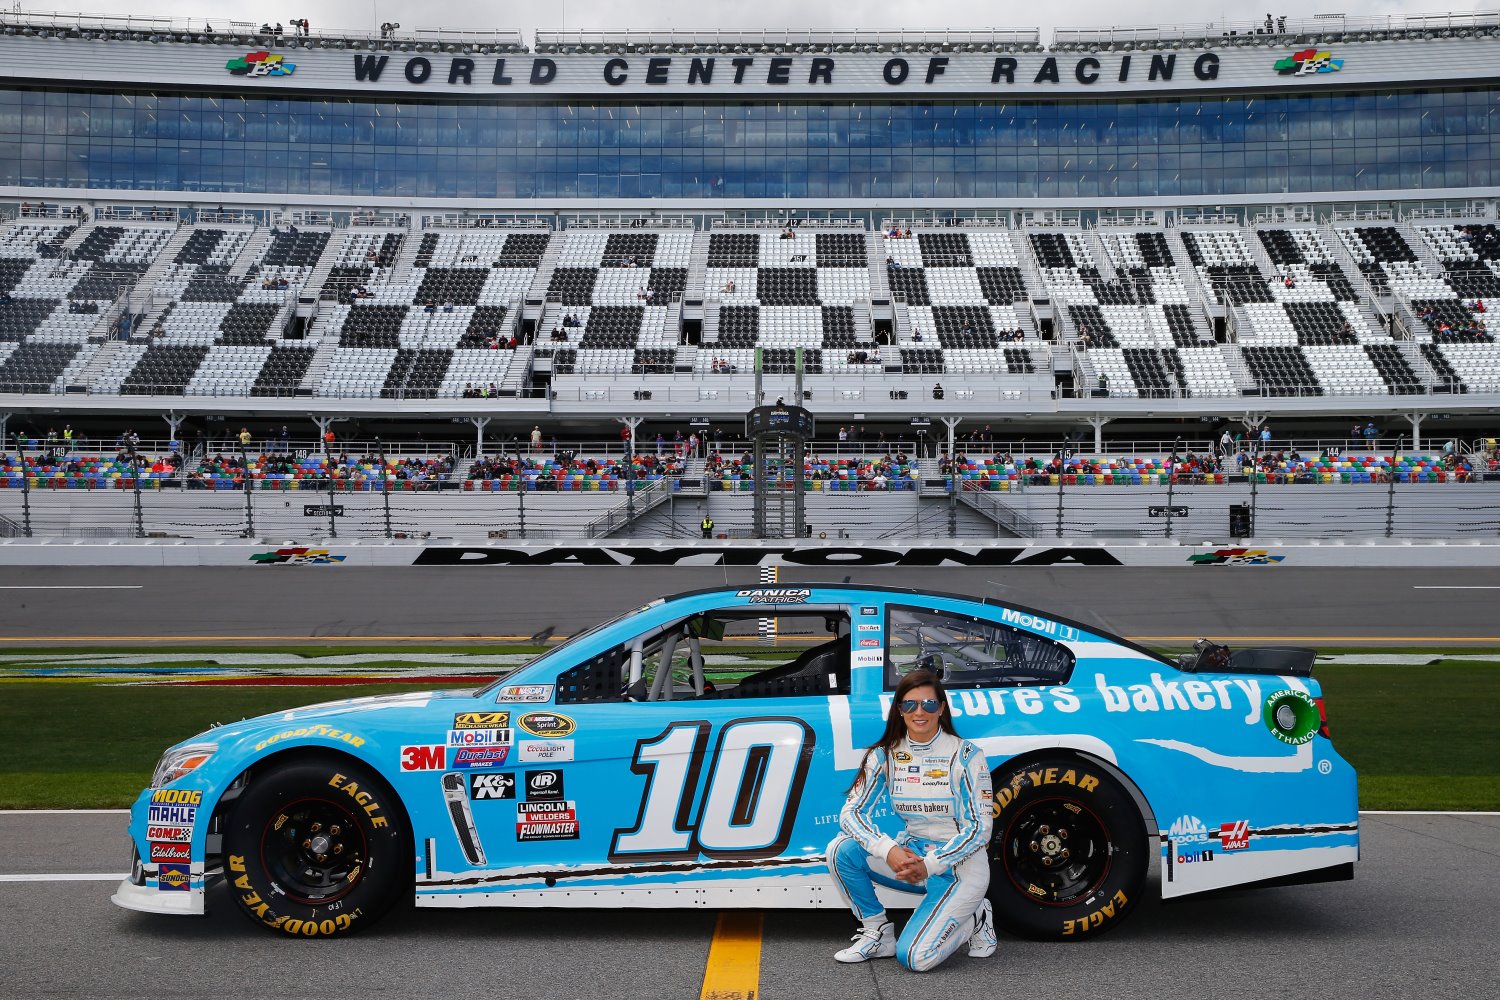 Will pit crew changes give Danica what she needs to finally win?